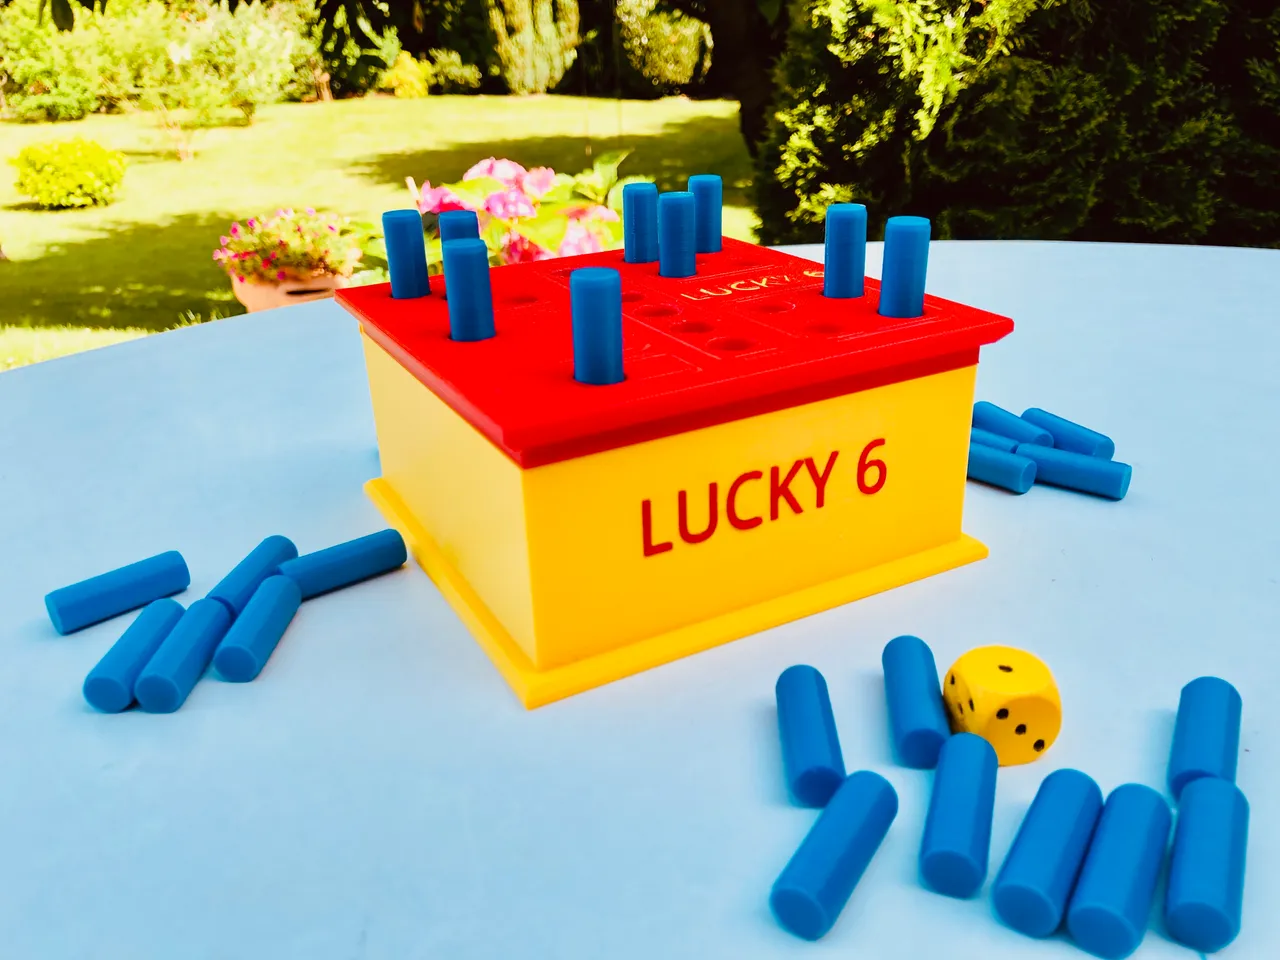 Lucky Block Tower - Free Play & No Download